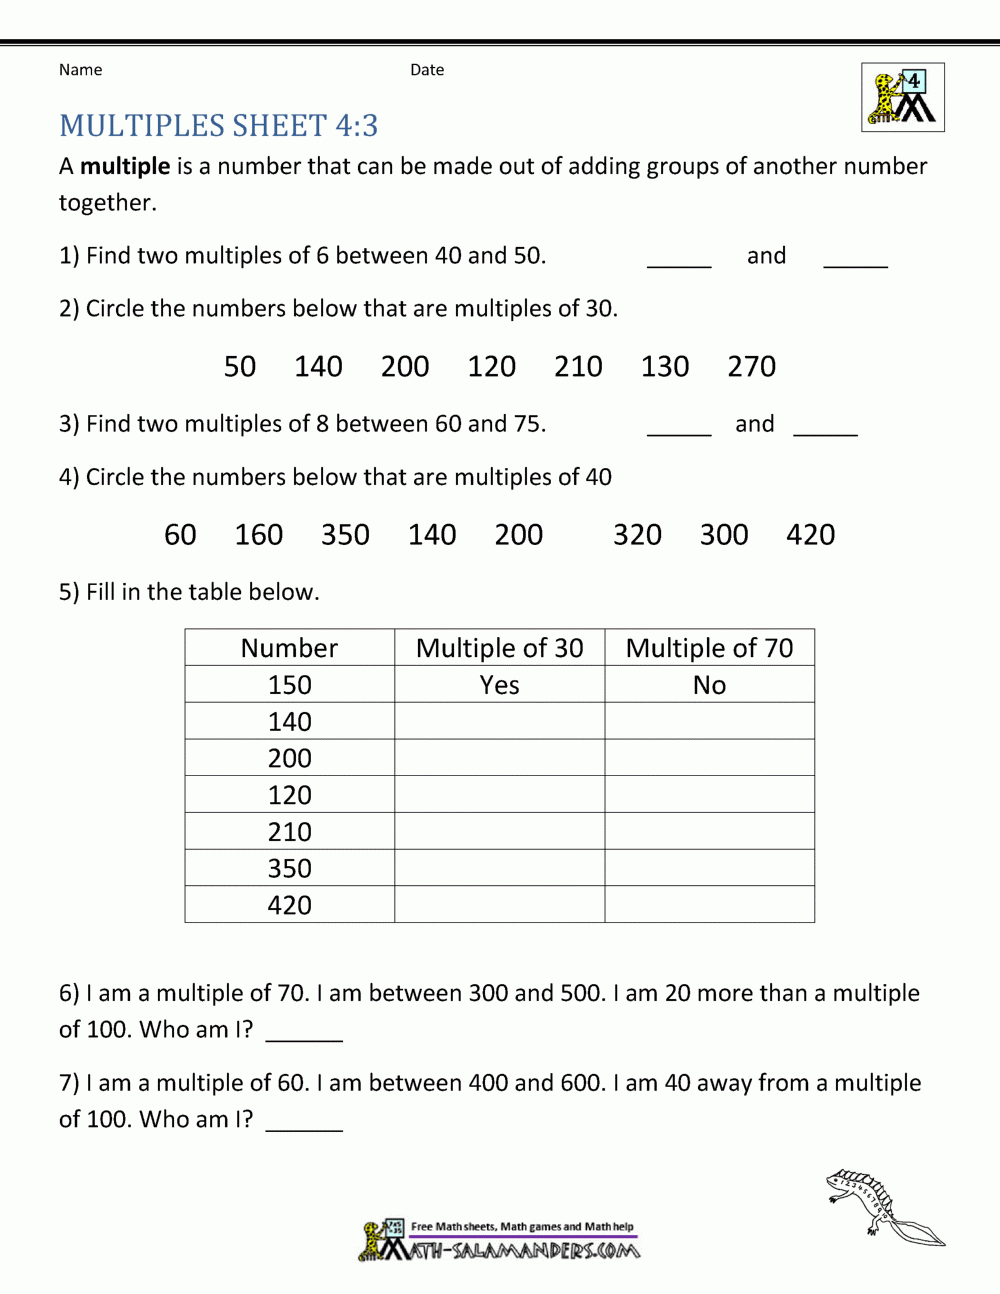 Maths Worksheets For Grade 5 Factors And Multiples Times Tables 